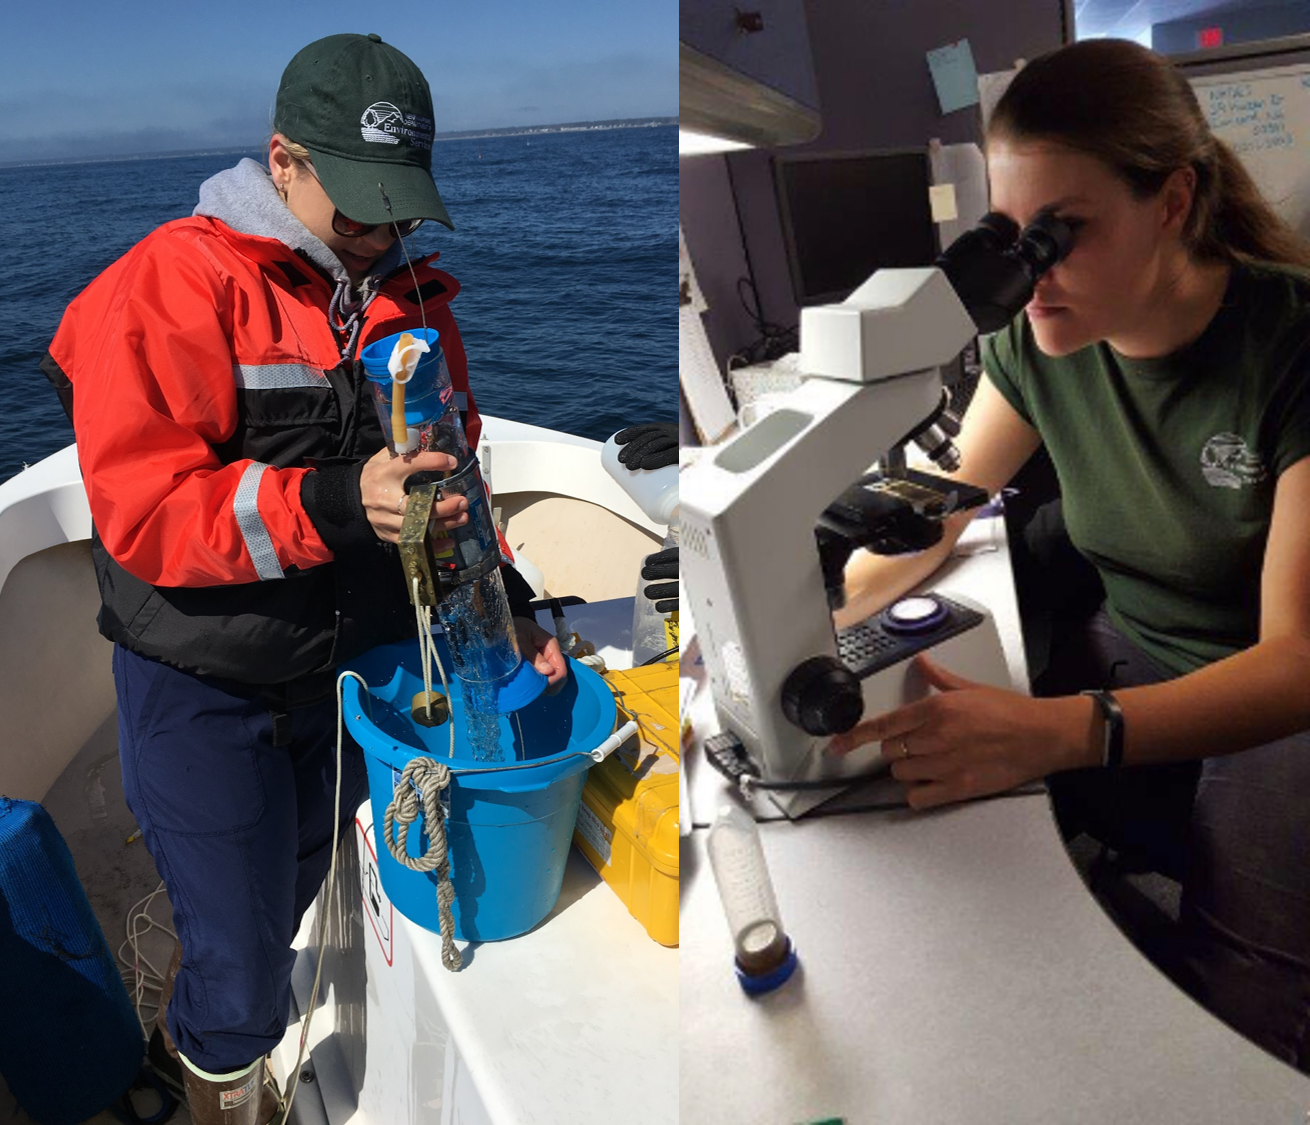 photo of person collecting a phytoplankton/red tide sample and photo of someone else identifying phytoplankton using a microscope